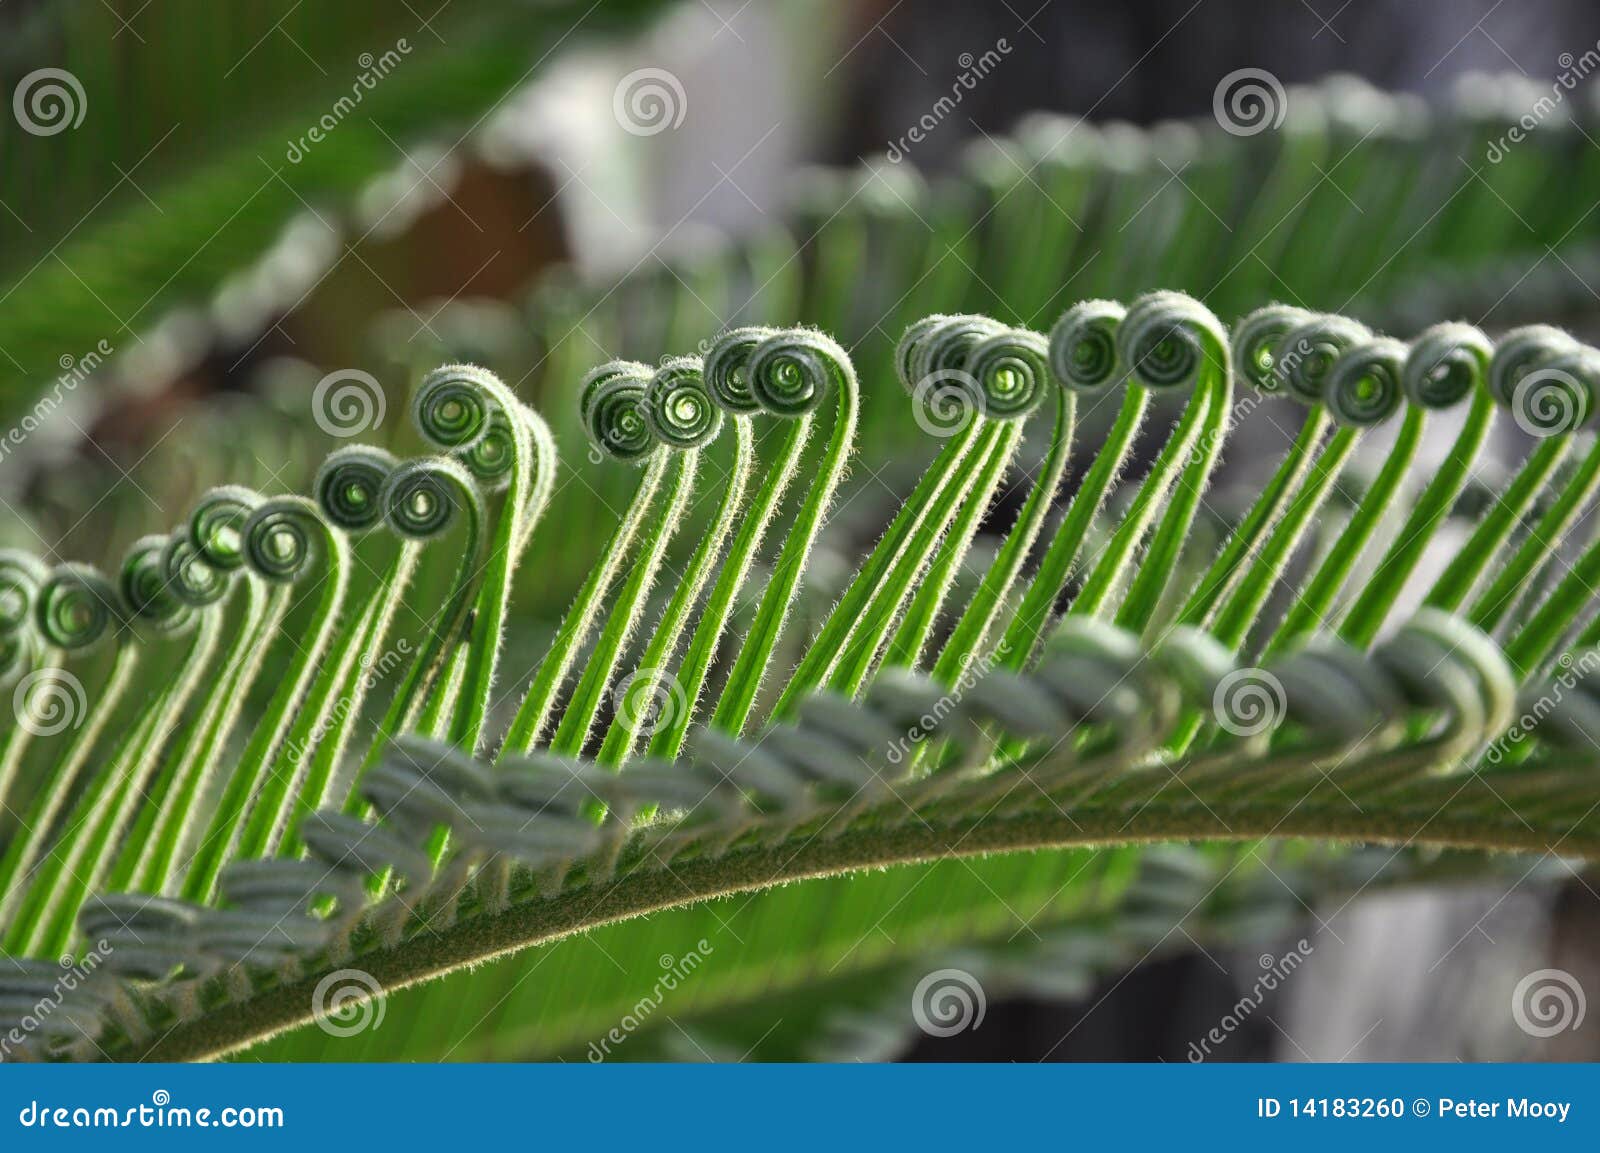 green curly cycad